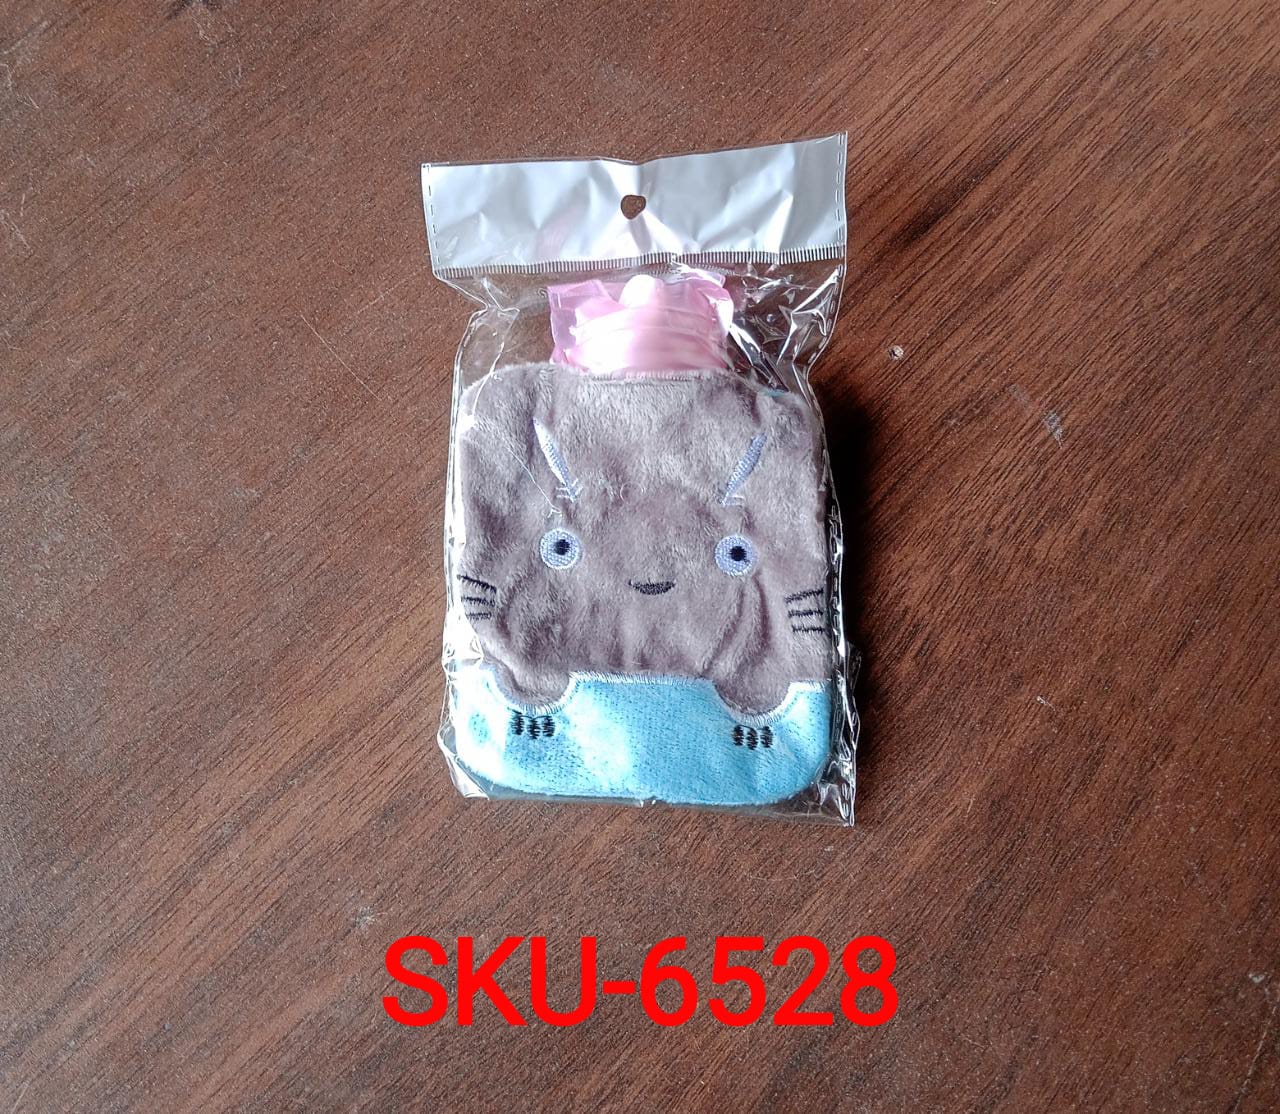 6528 Grey Cat Print small Hot Water Bag with Cover for Pain Relief, Neck, Shoulder Pain and Hand, Feet Warmer, Menstrual Cramps. DeoDap